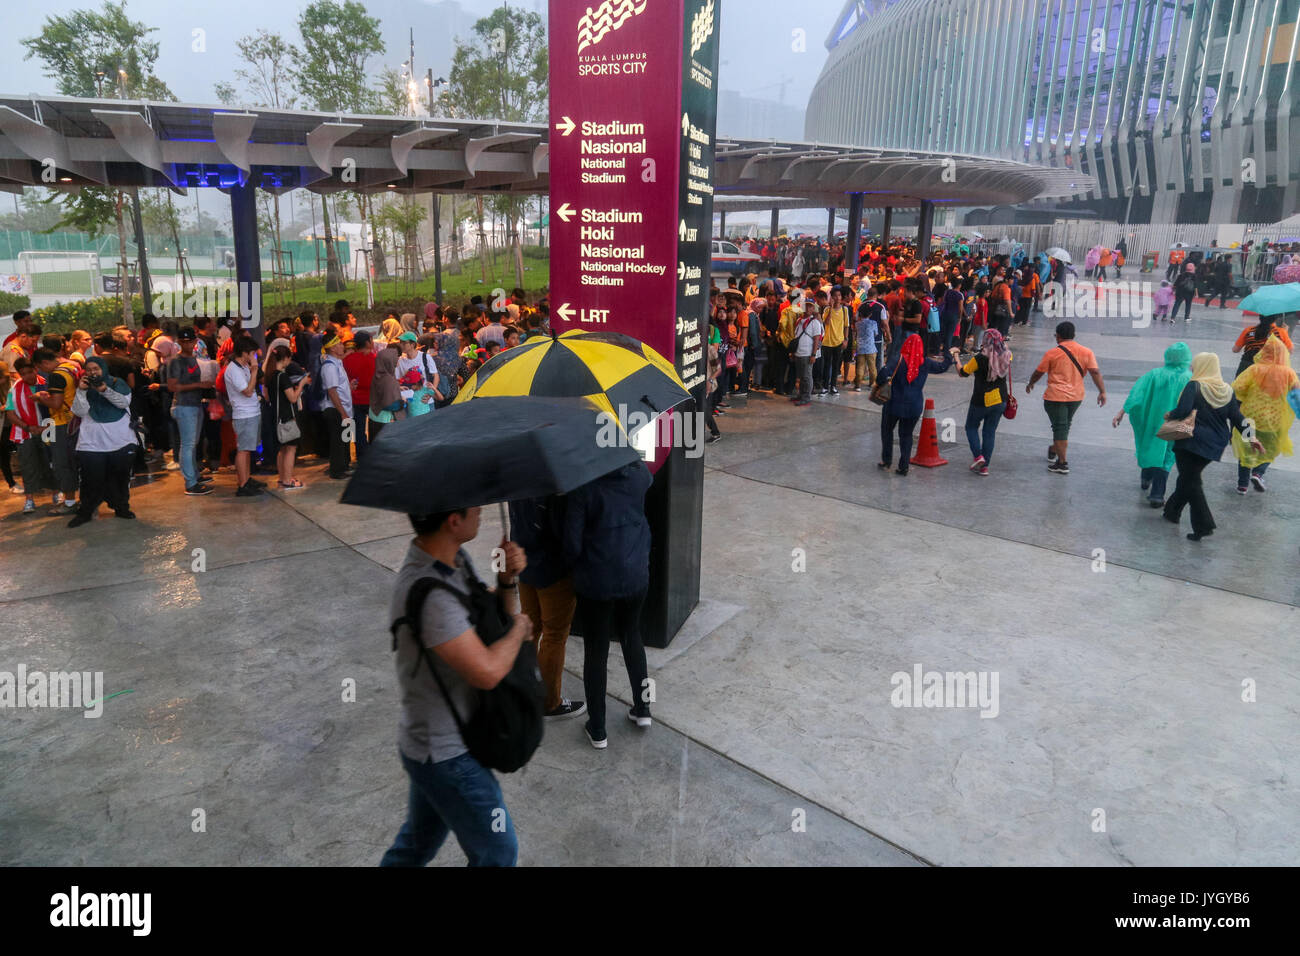 Crowd go under the shade when heavy rain suddenly pour down during the opening ceremony of 29th SEA games. Credit: Calvin Chan/Alamy Live News Stock Photo